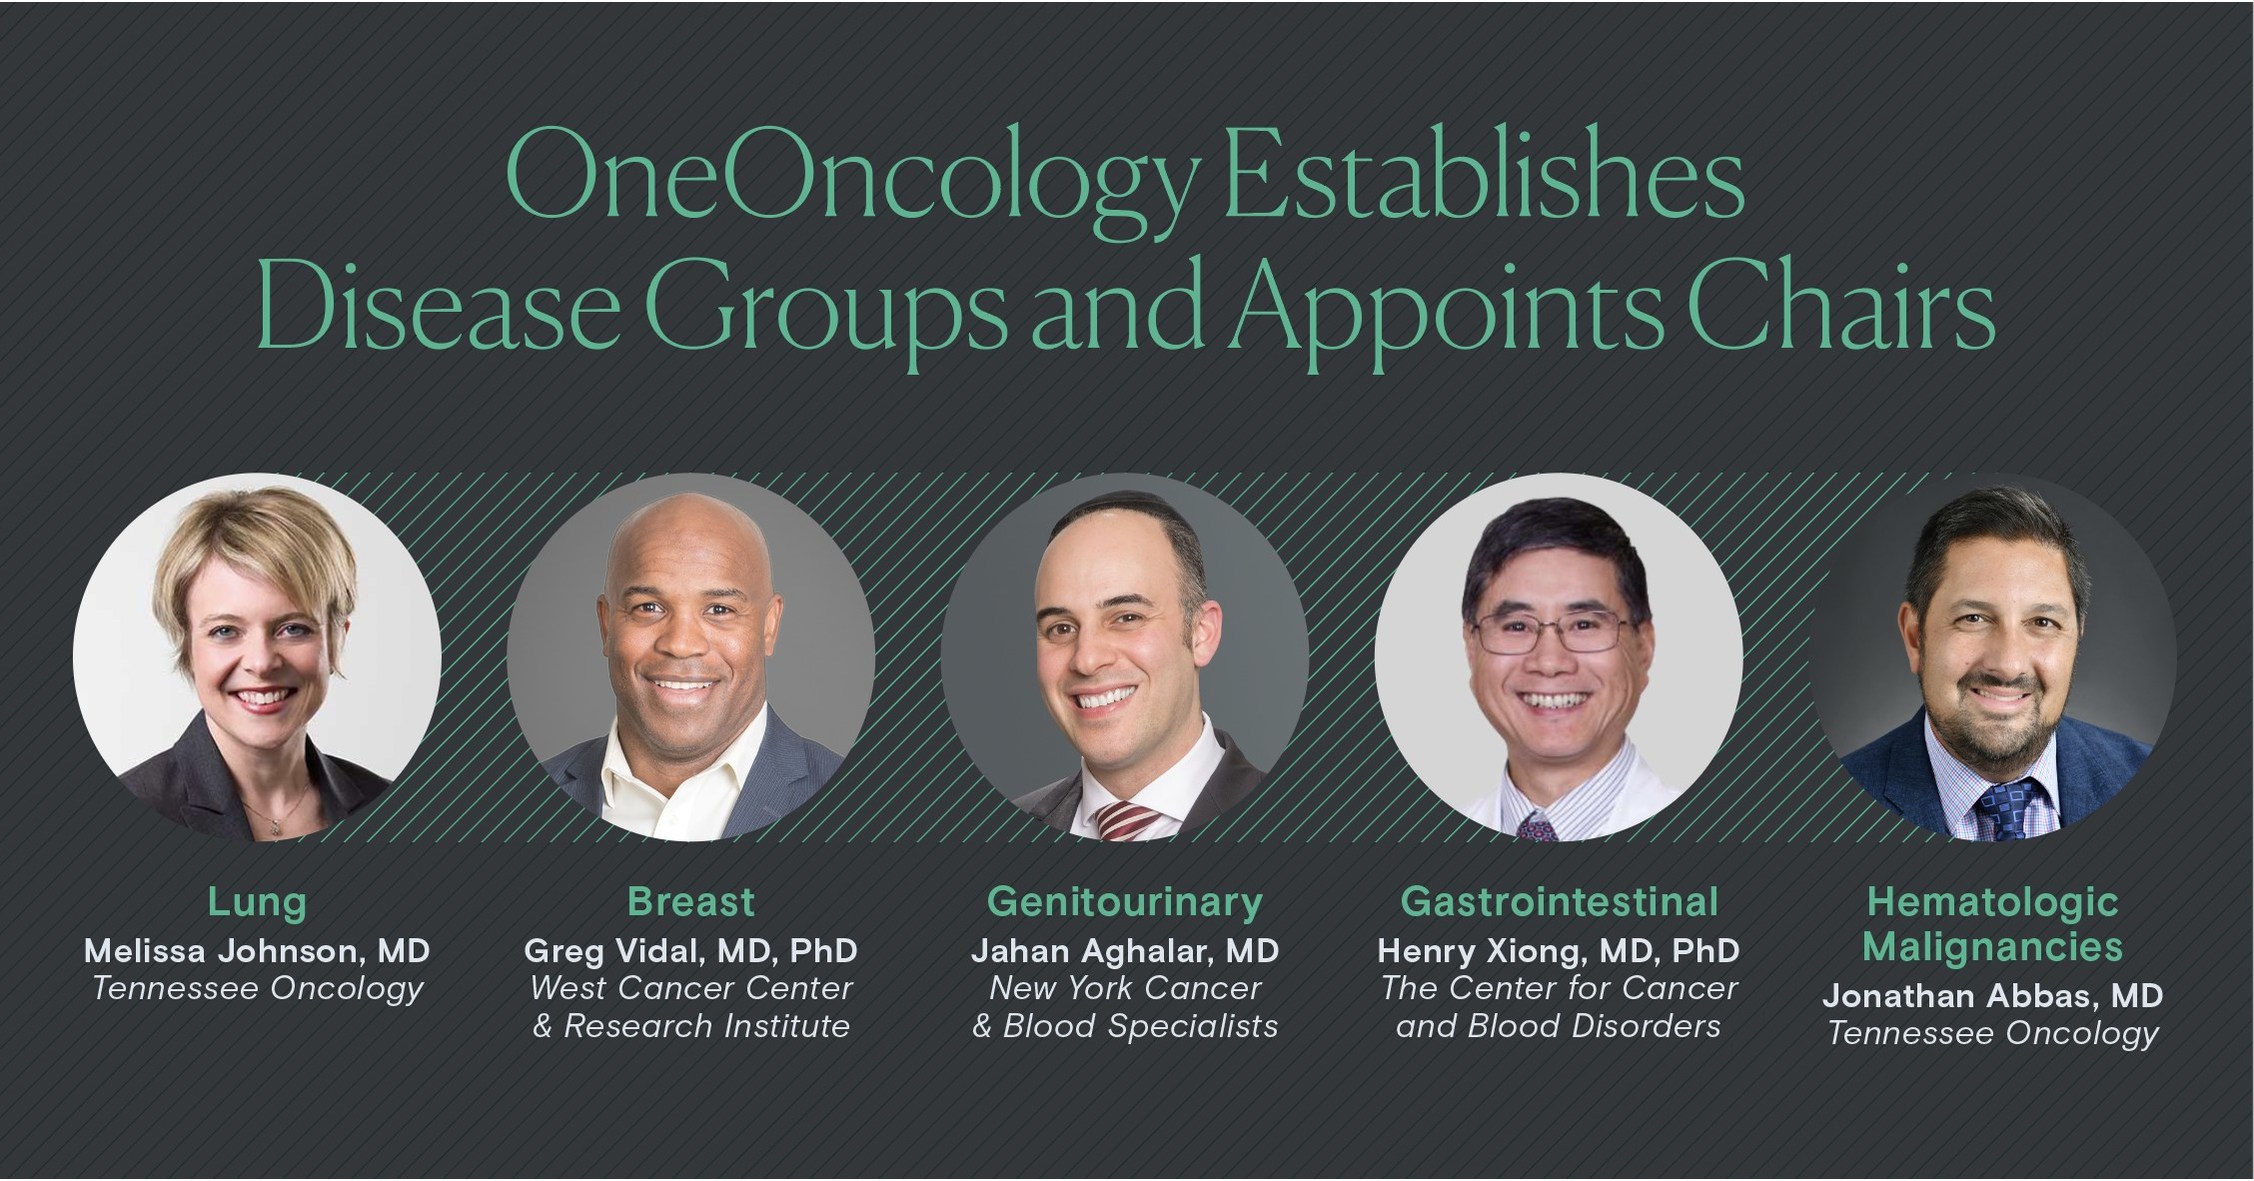 OneOncology Establishes Disease Groups, Appoints Chairs